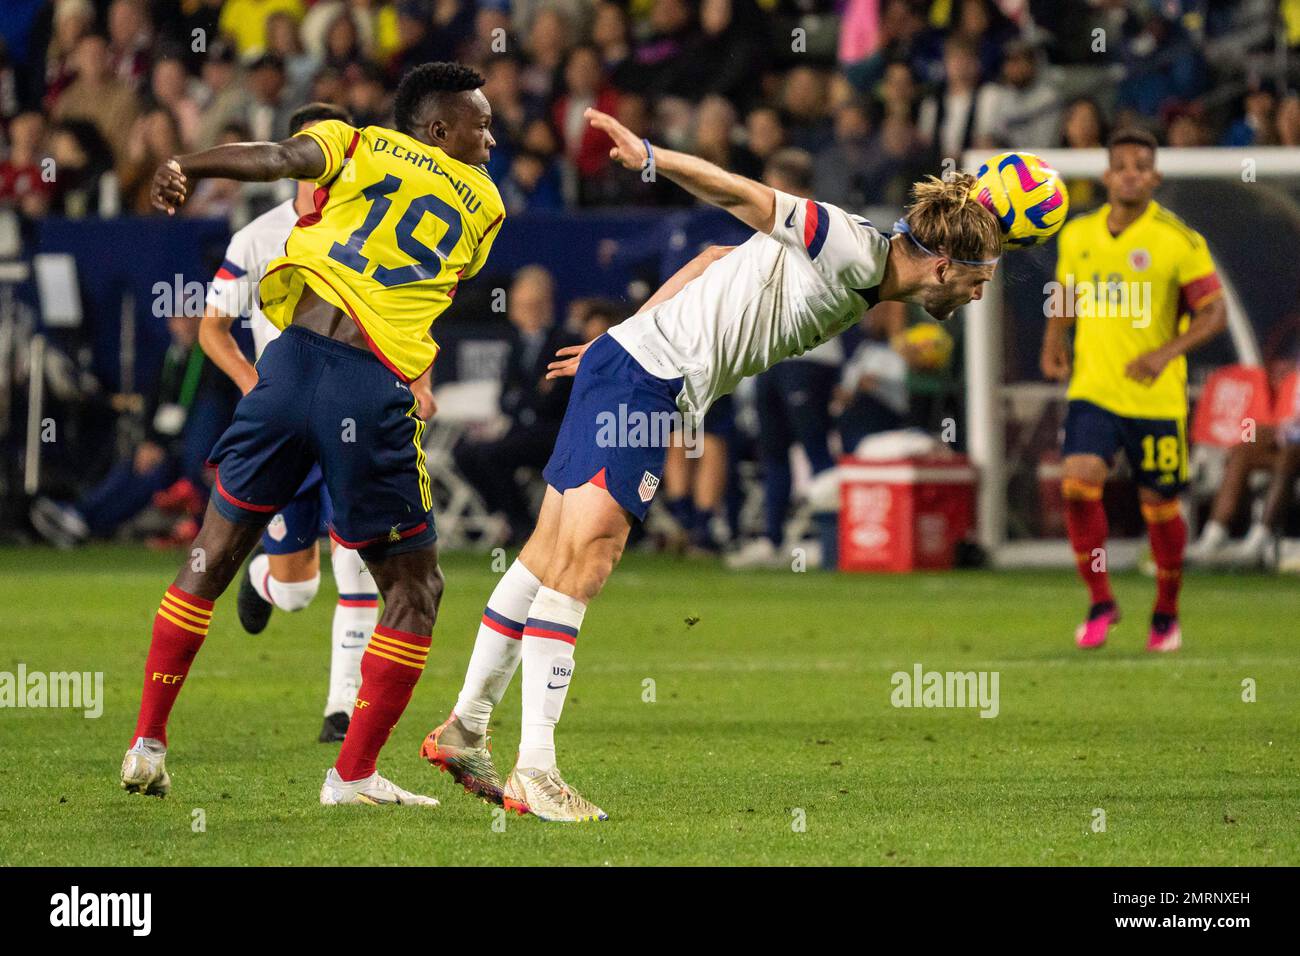 United States of America defender Walker Zimmerman (3) wins a header against Colombia forward Diber Cambindo (19) during an international friendly mat Stock Photo